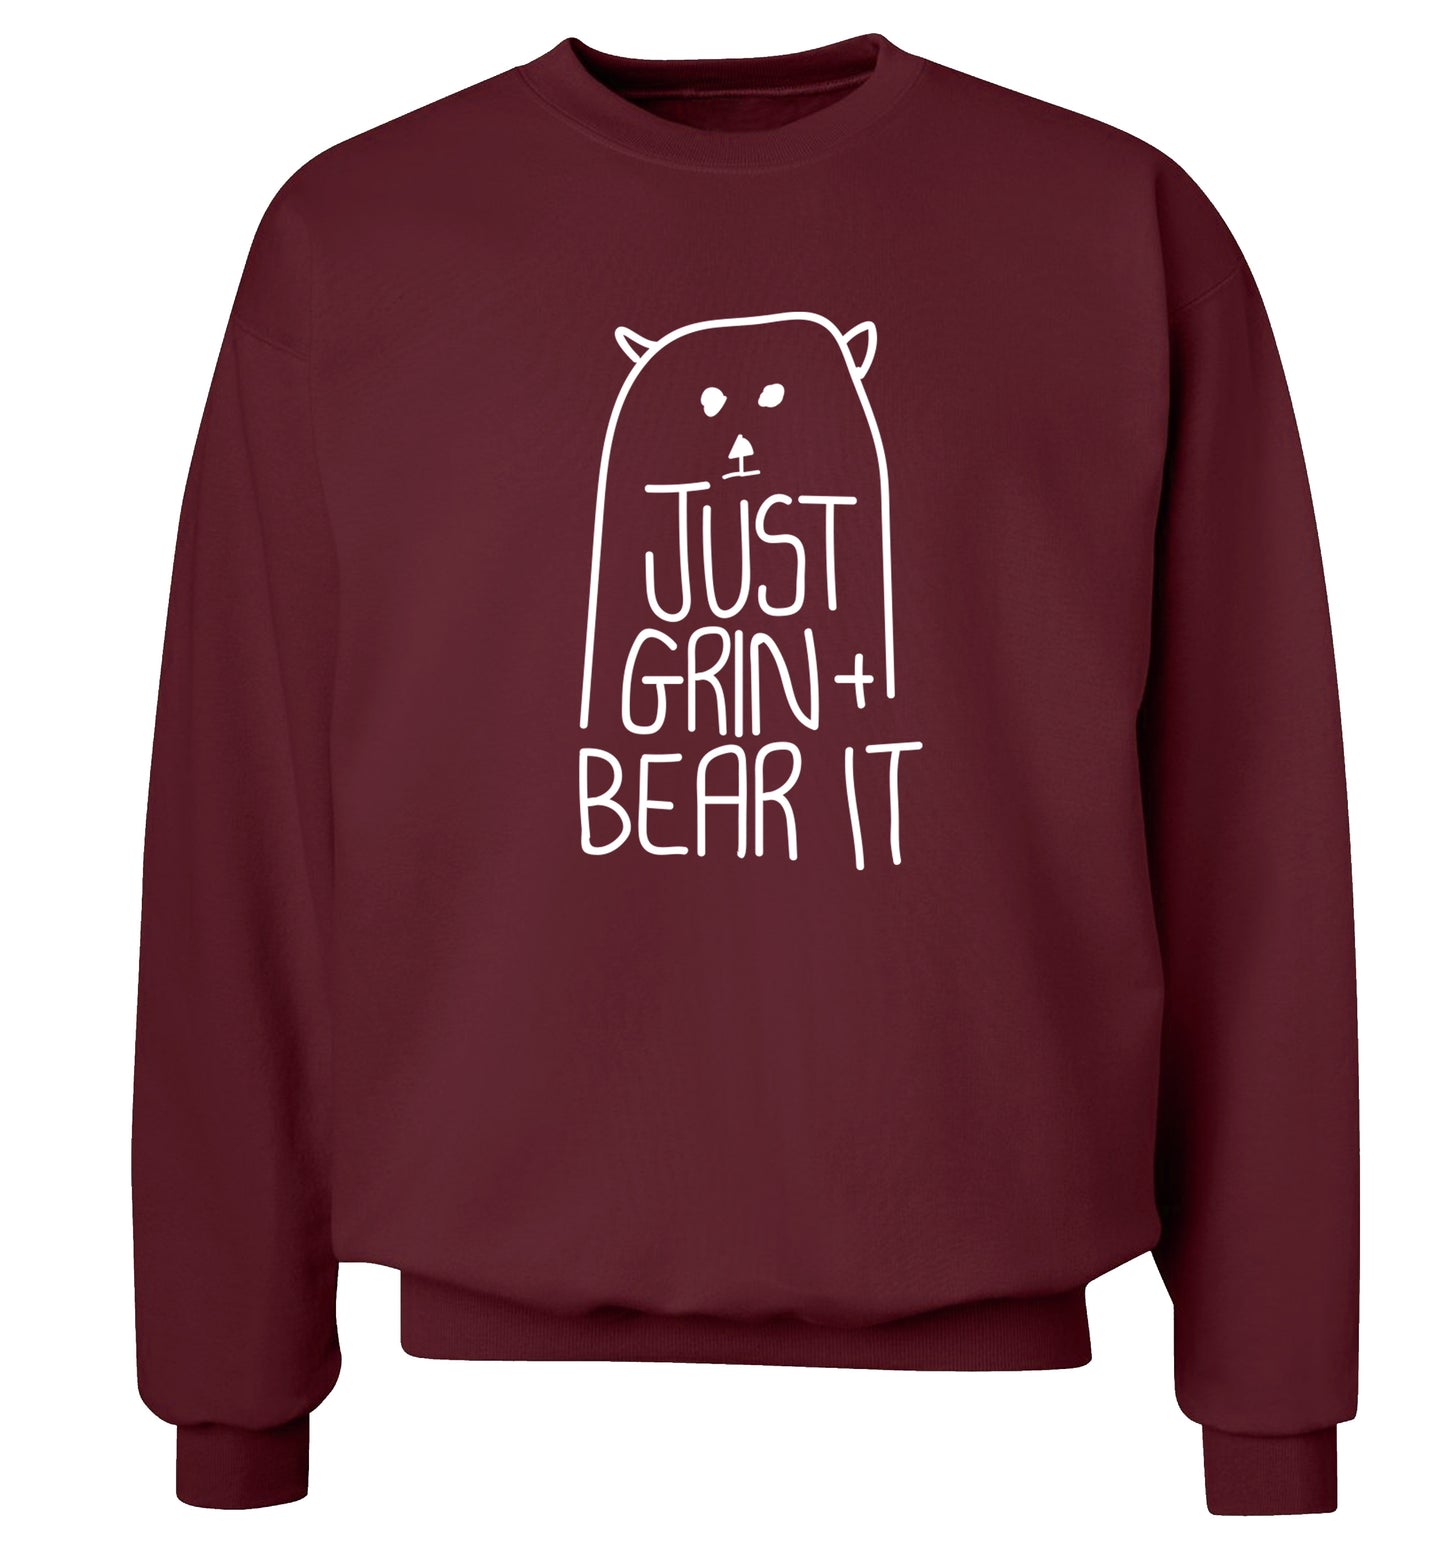 Just grin and bear it Adult's unisex maroon Sweater 2XL